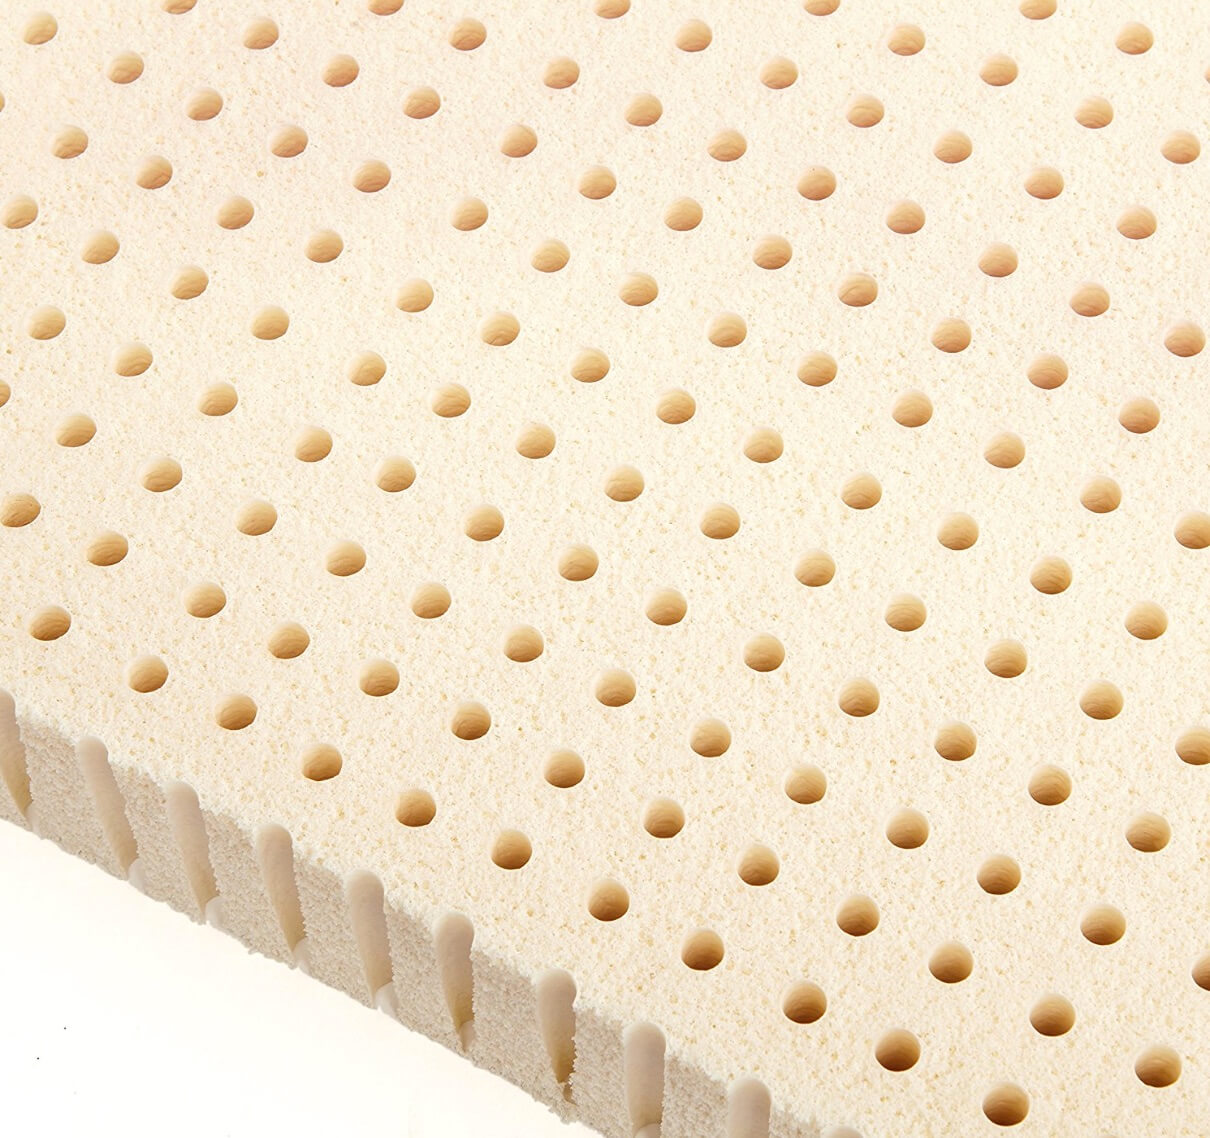 Latex mattress and allergy